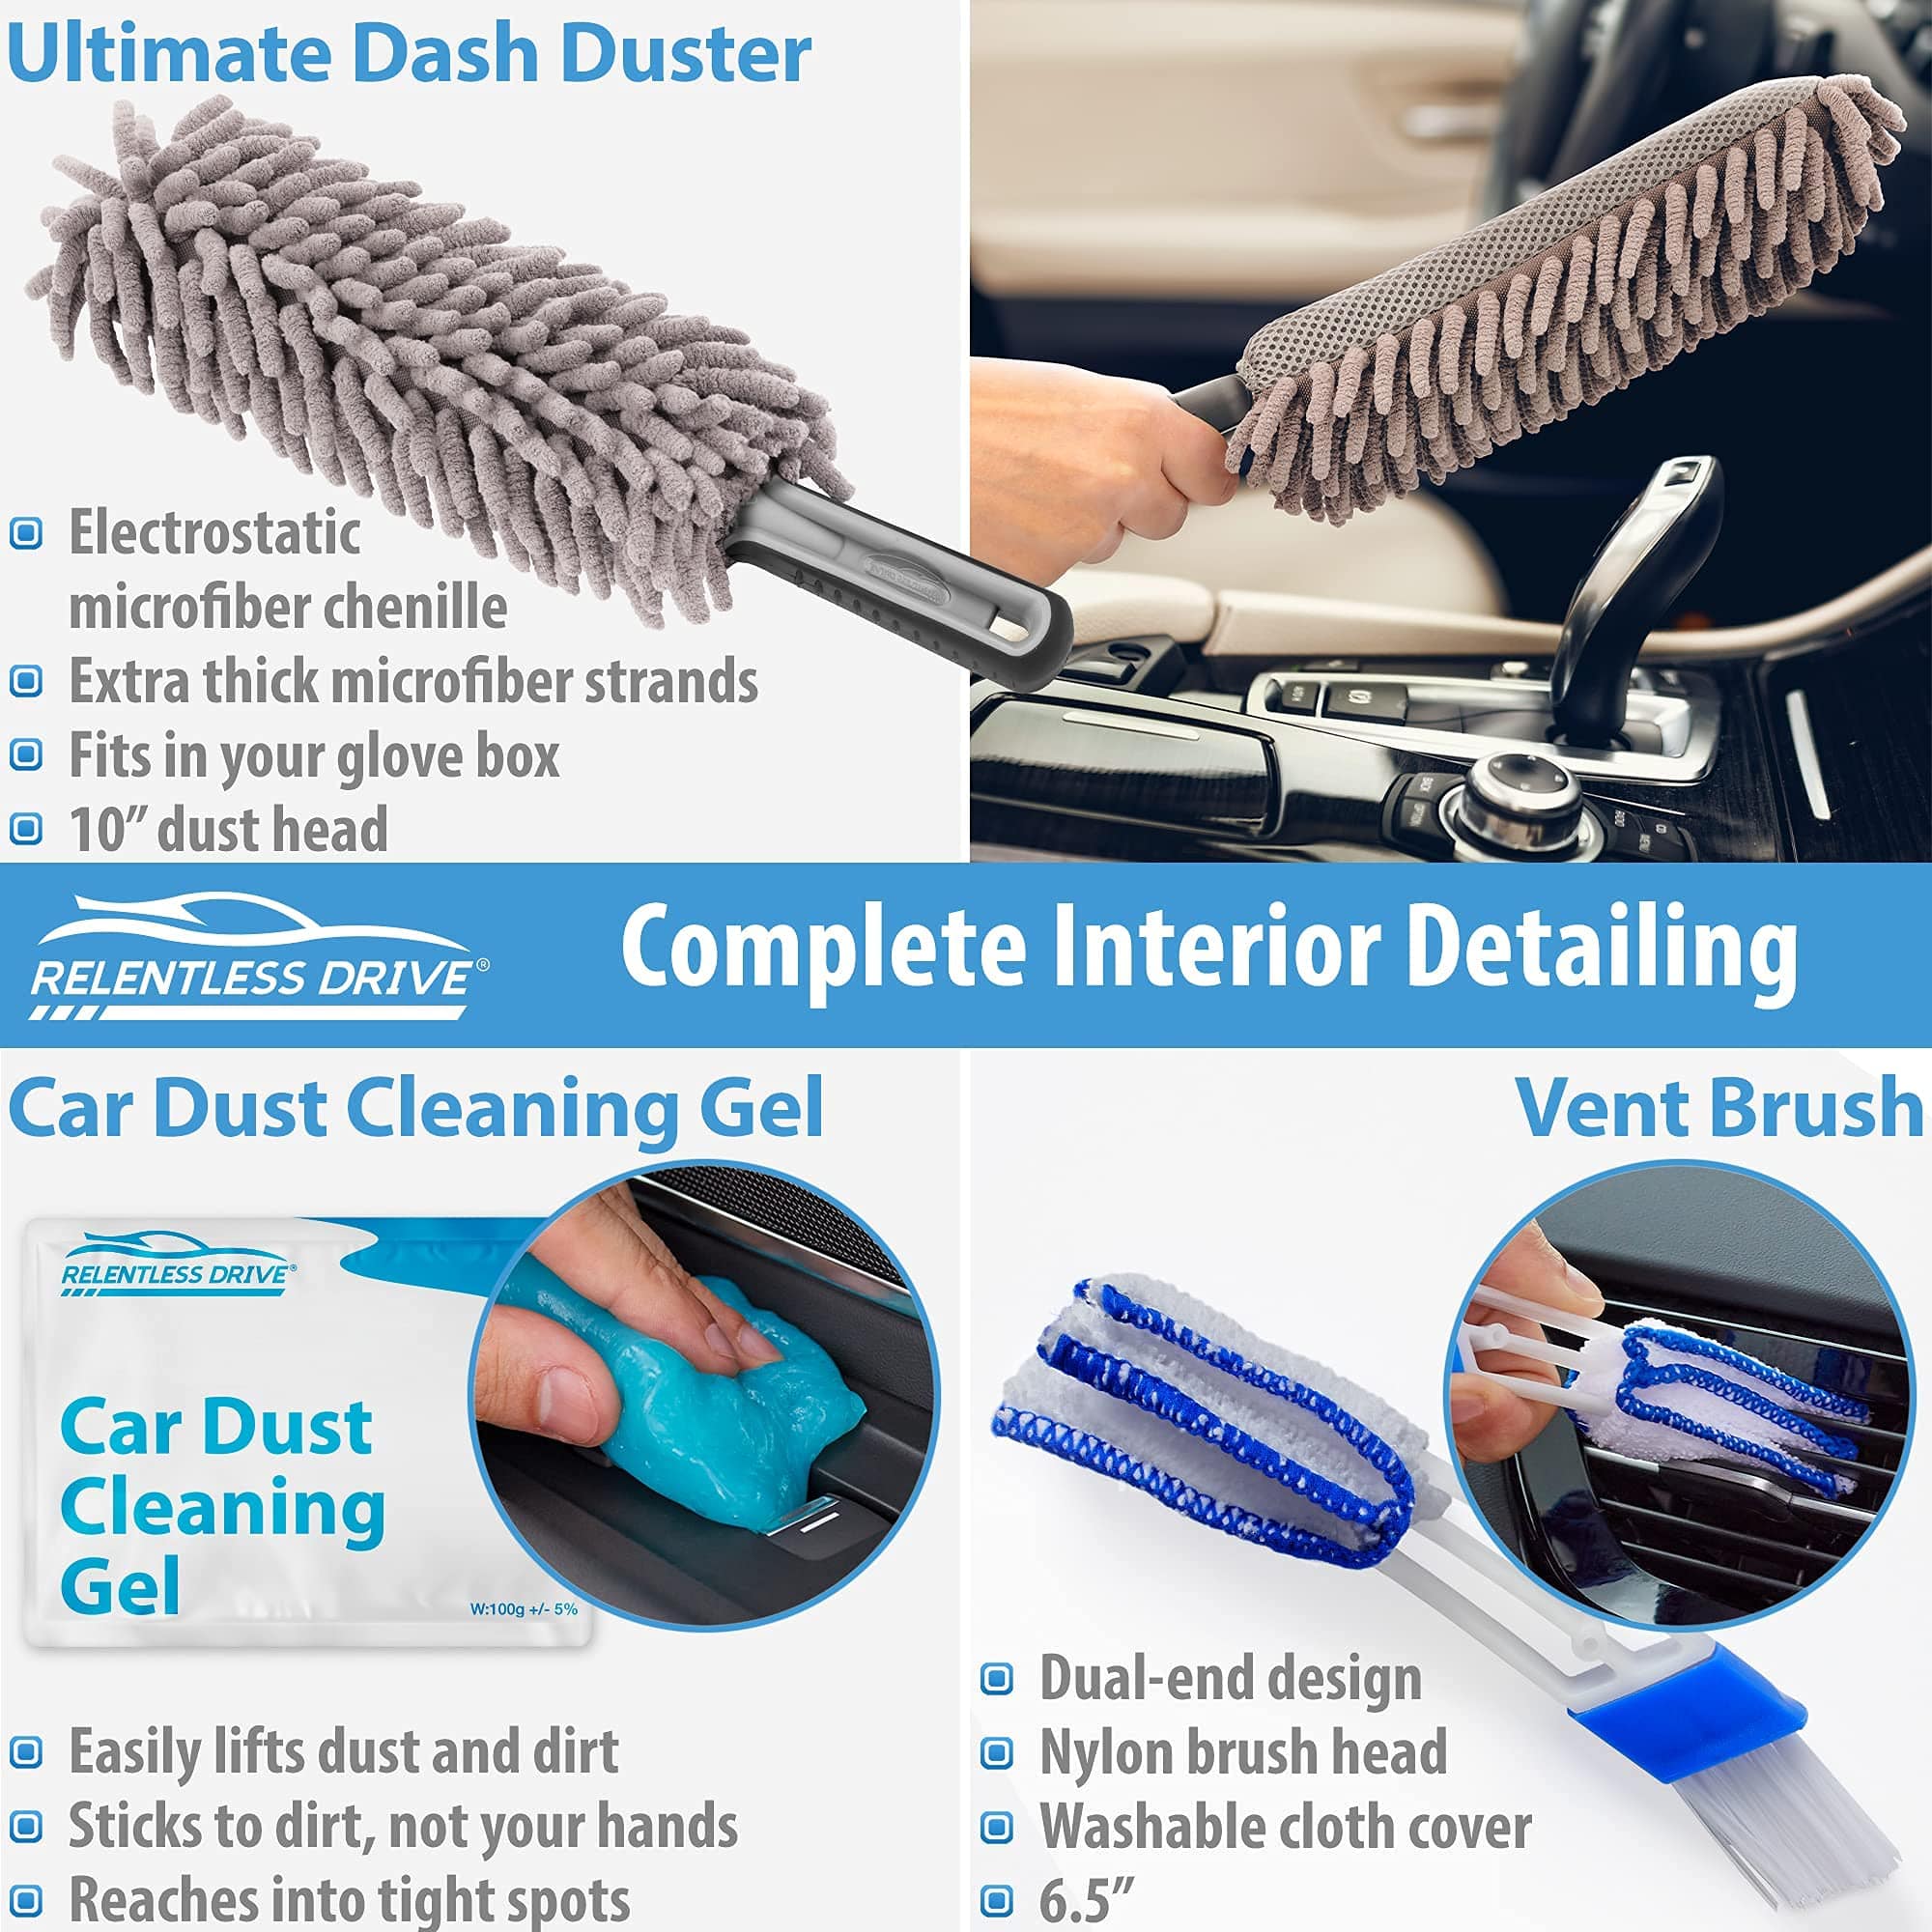 Car Detailing Kit With 5 Cleaning Brushes